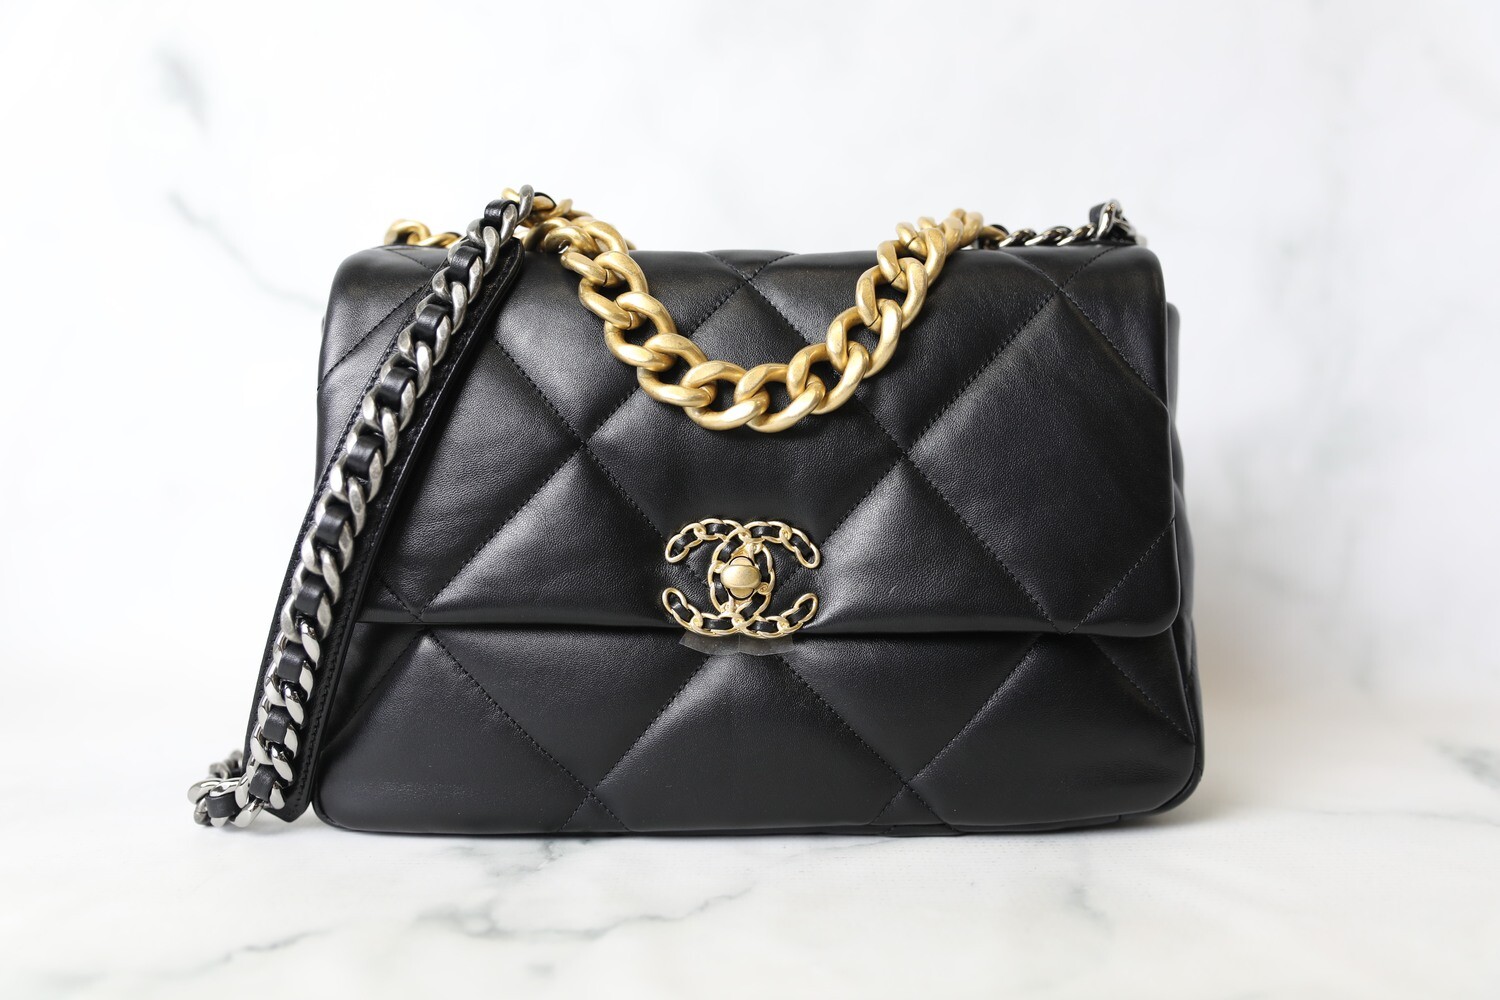 Chanel 19 Large, Black Leather, New in Box